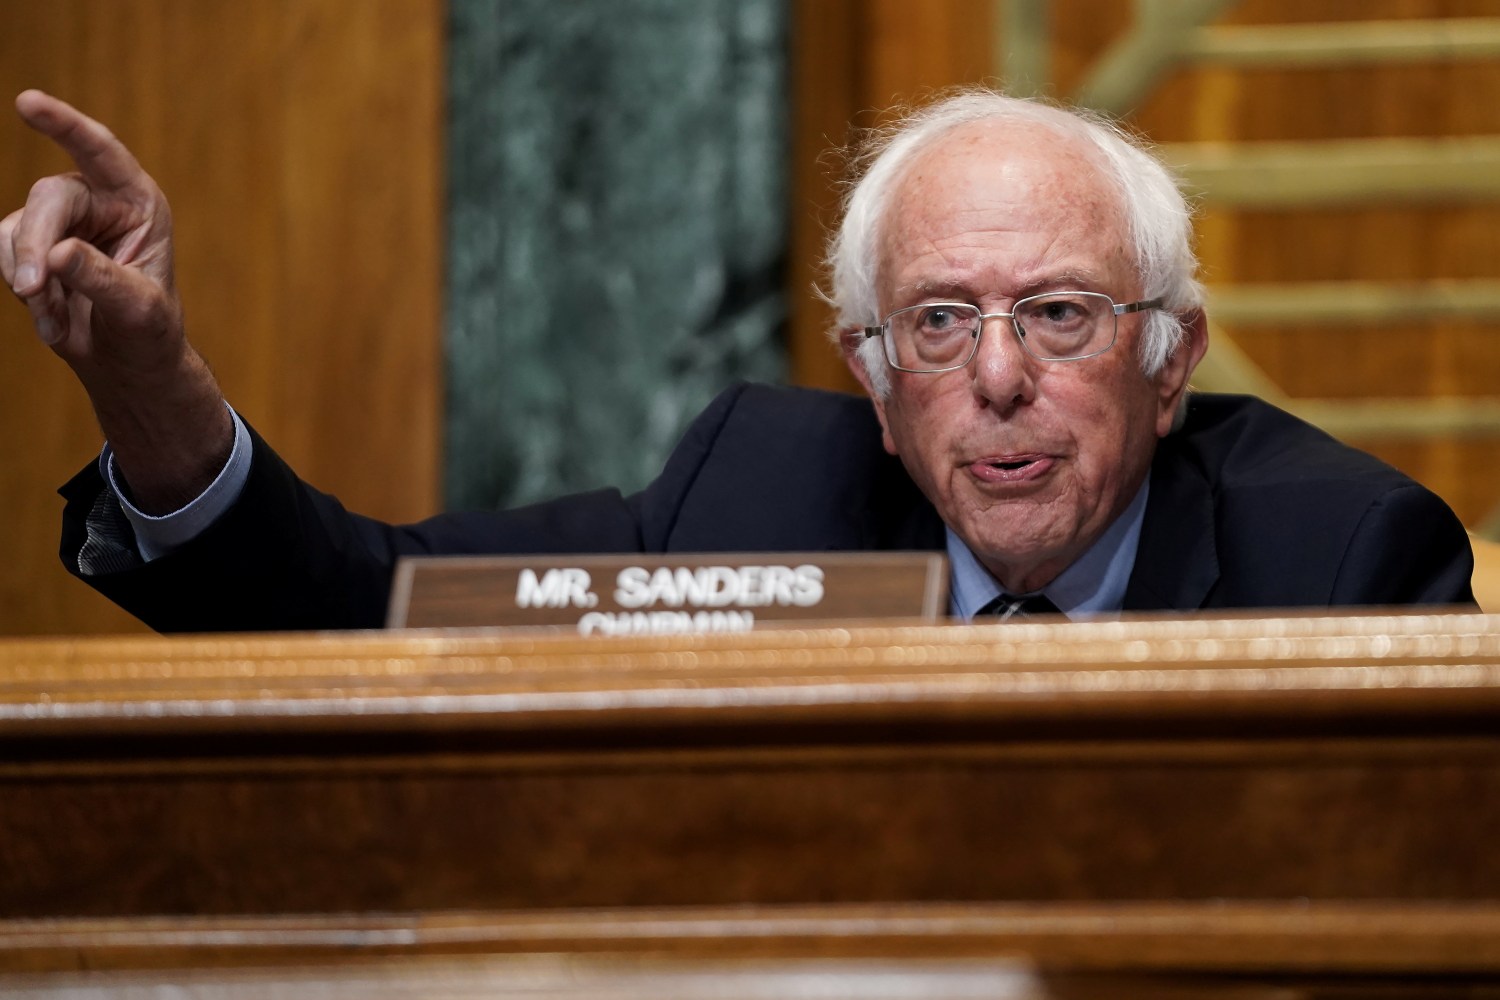 Senate Budget Committee Chairman Sen. Bernie Sanders (I-VT) gives an opening statement during a hearing to discuss President Biden's budget request for FY 2022, at the U.S. Capitol in Washington, D.C., U.S., June 8, 2021. Greg Nash/Pool via REUTERS